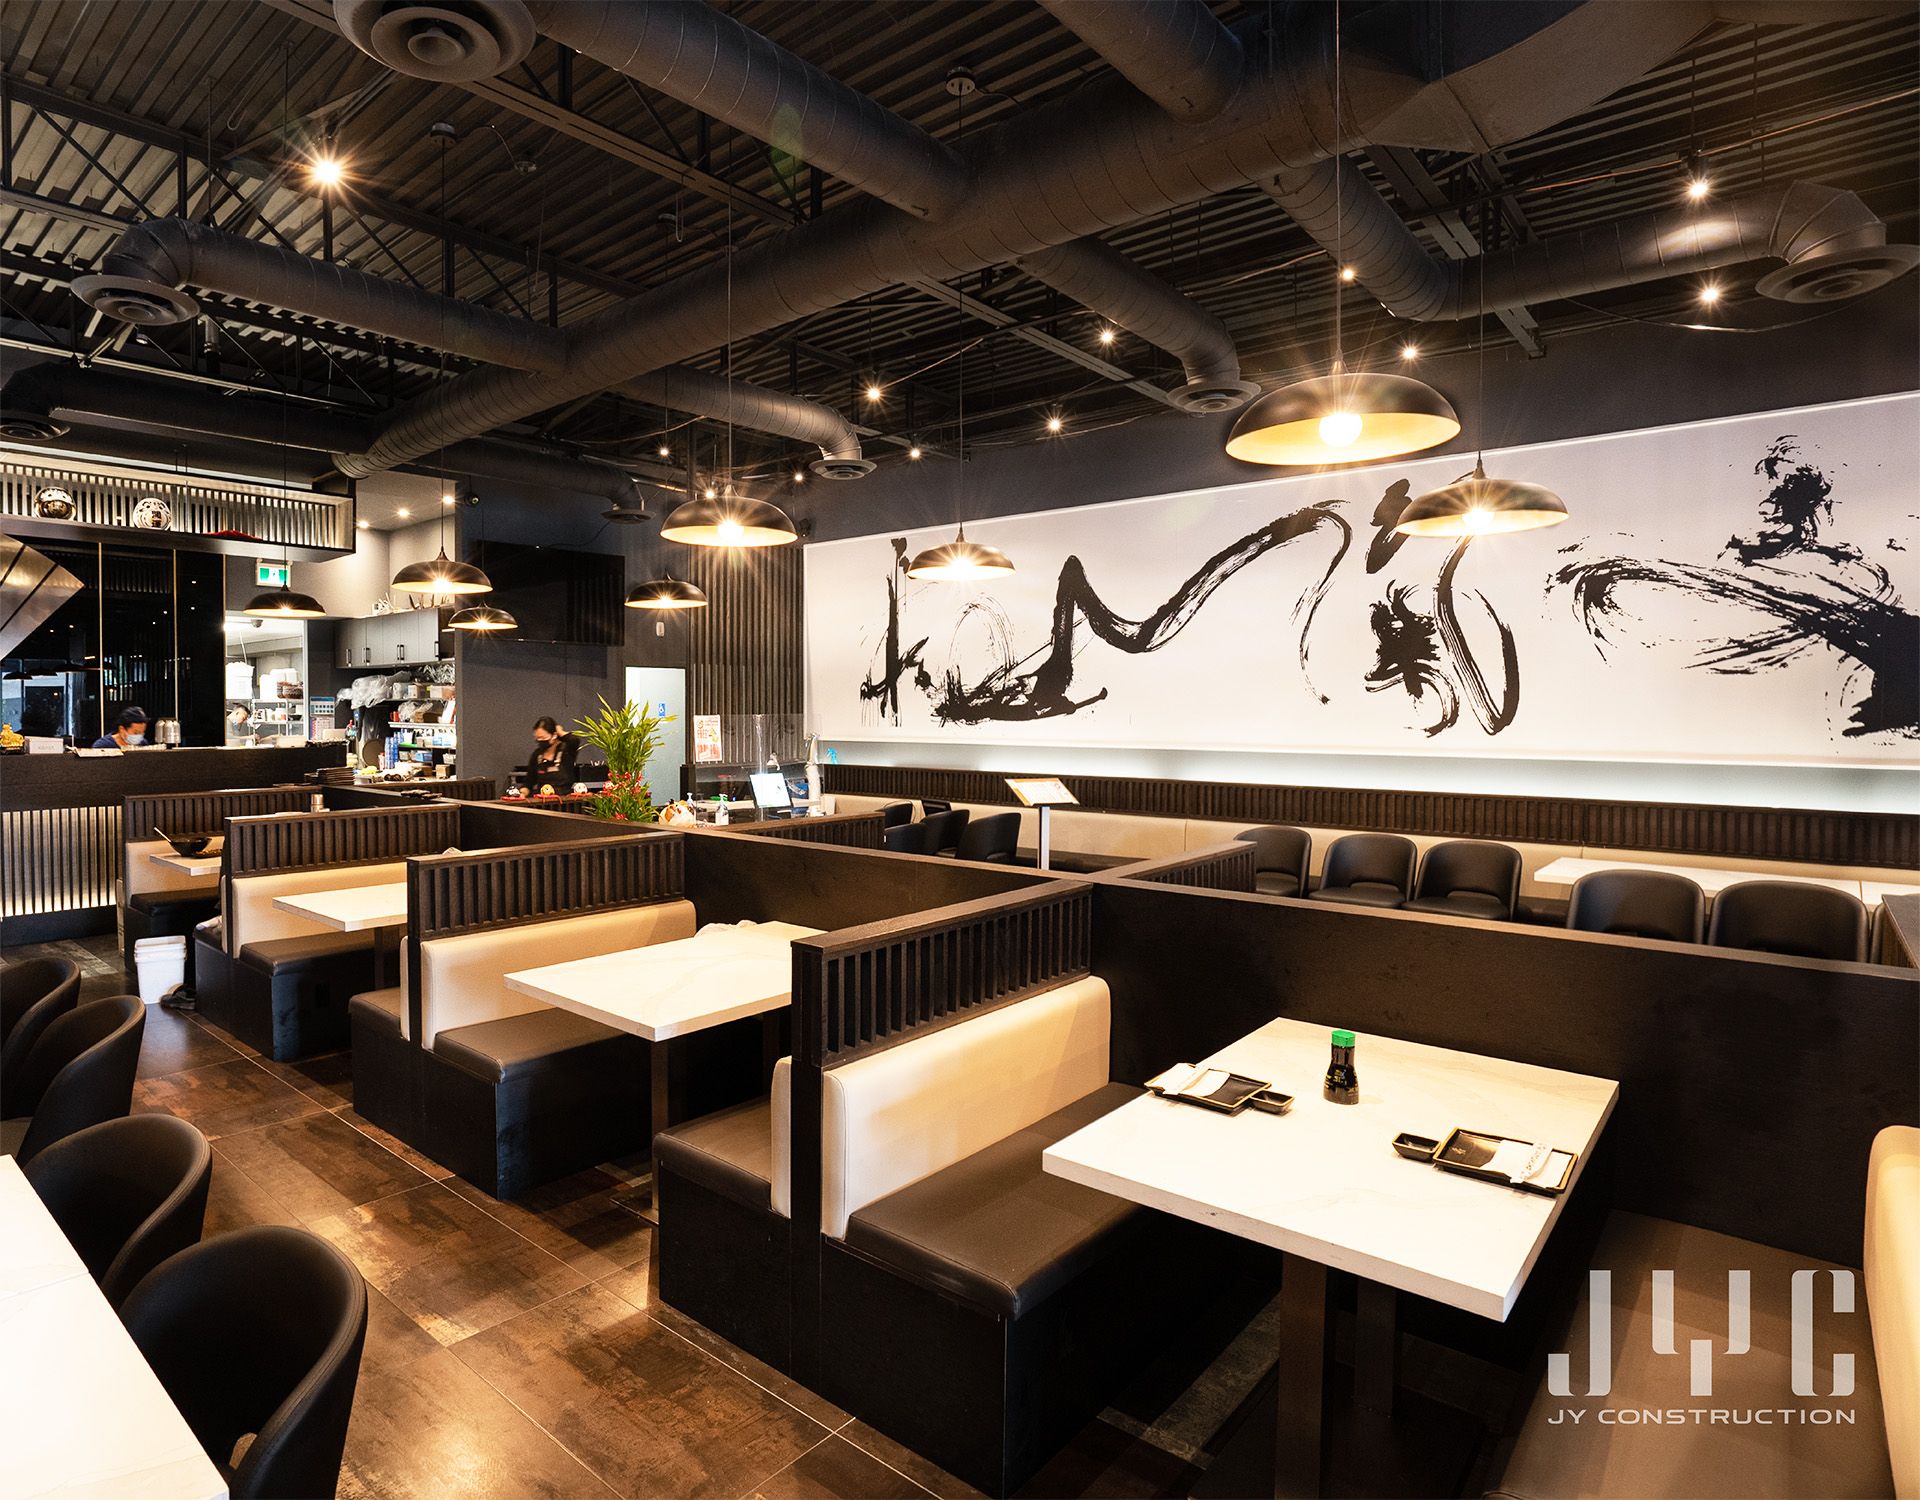 kung-fu-sushi-japanese-restaurant-renovation-in-north-york-by-jy-construction-in-english-3.jpg